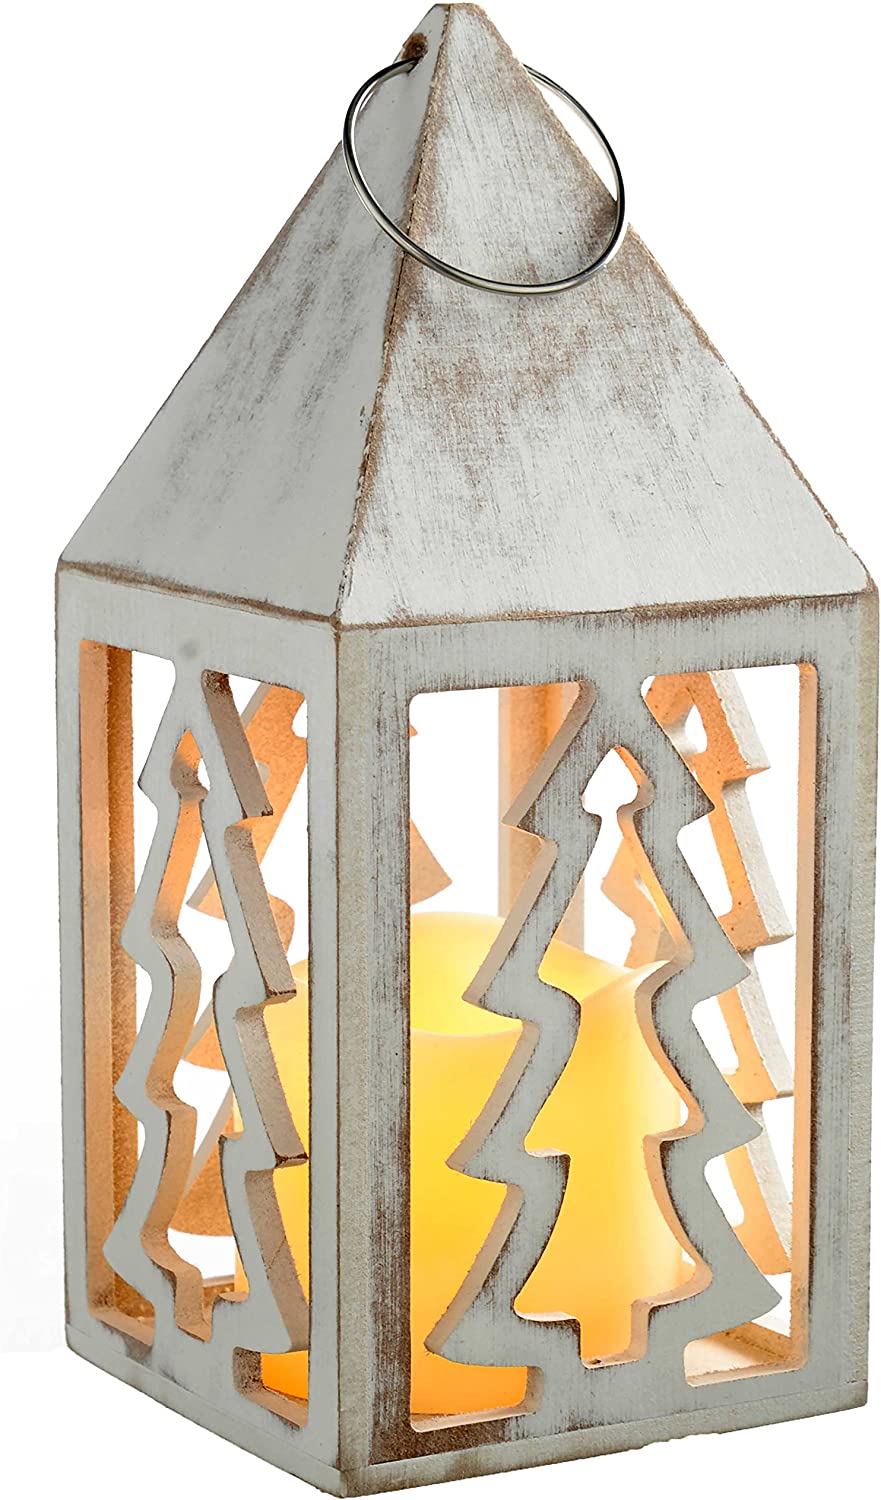 WeRChristmas Christmas Tree Lantern Decorated with Wood, 21 cm – Antique White